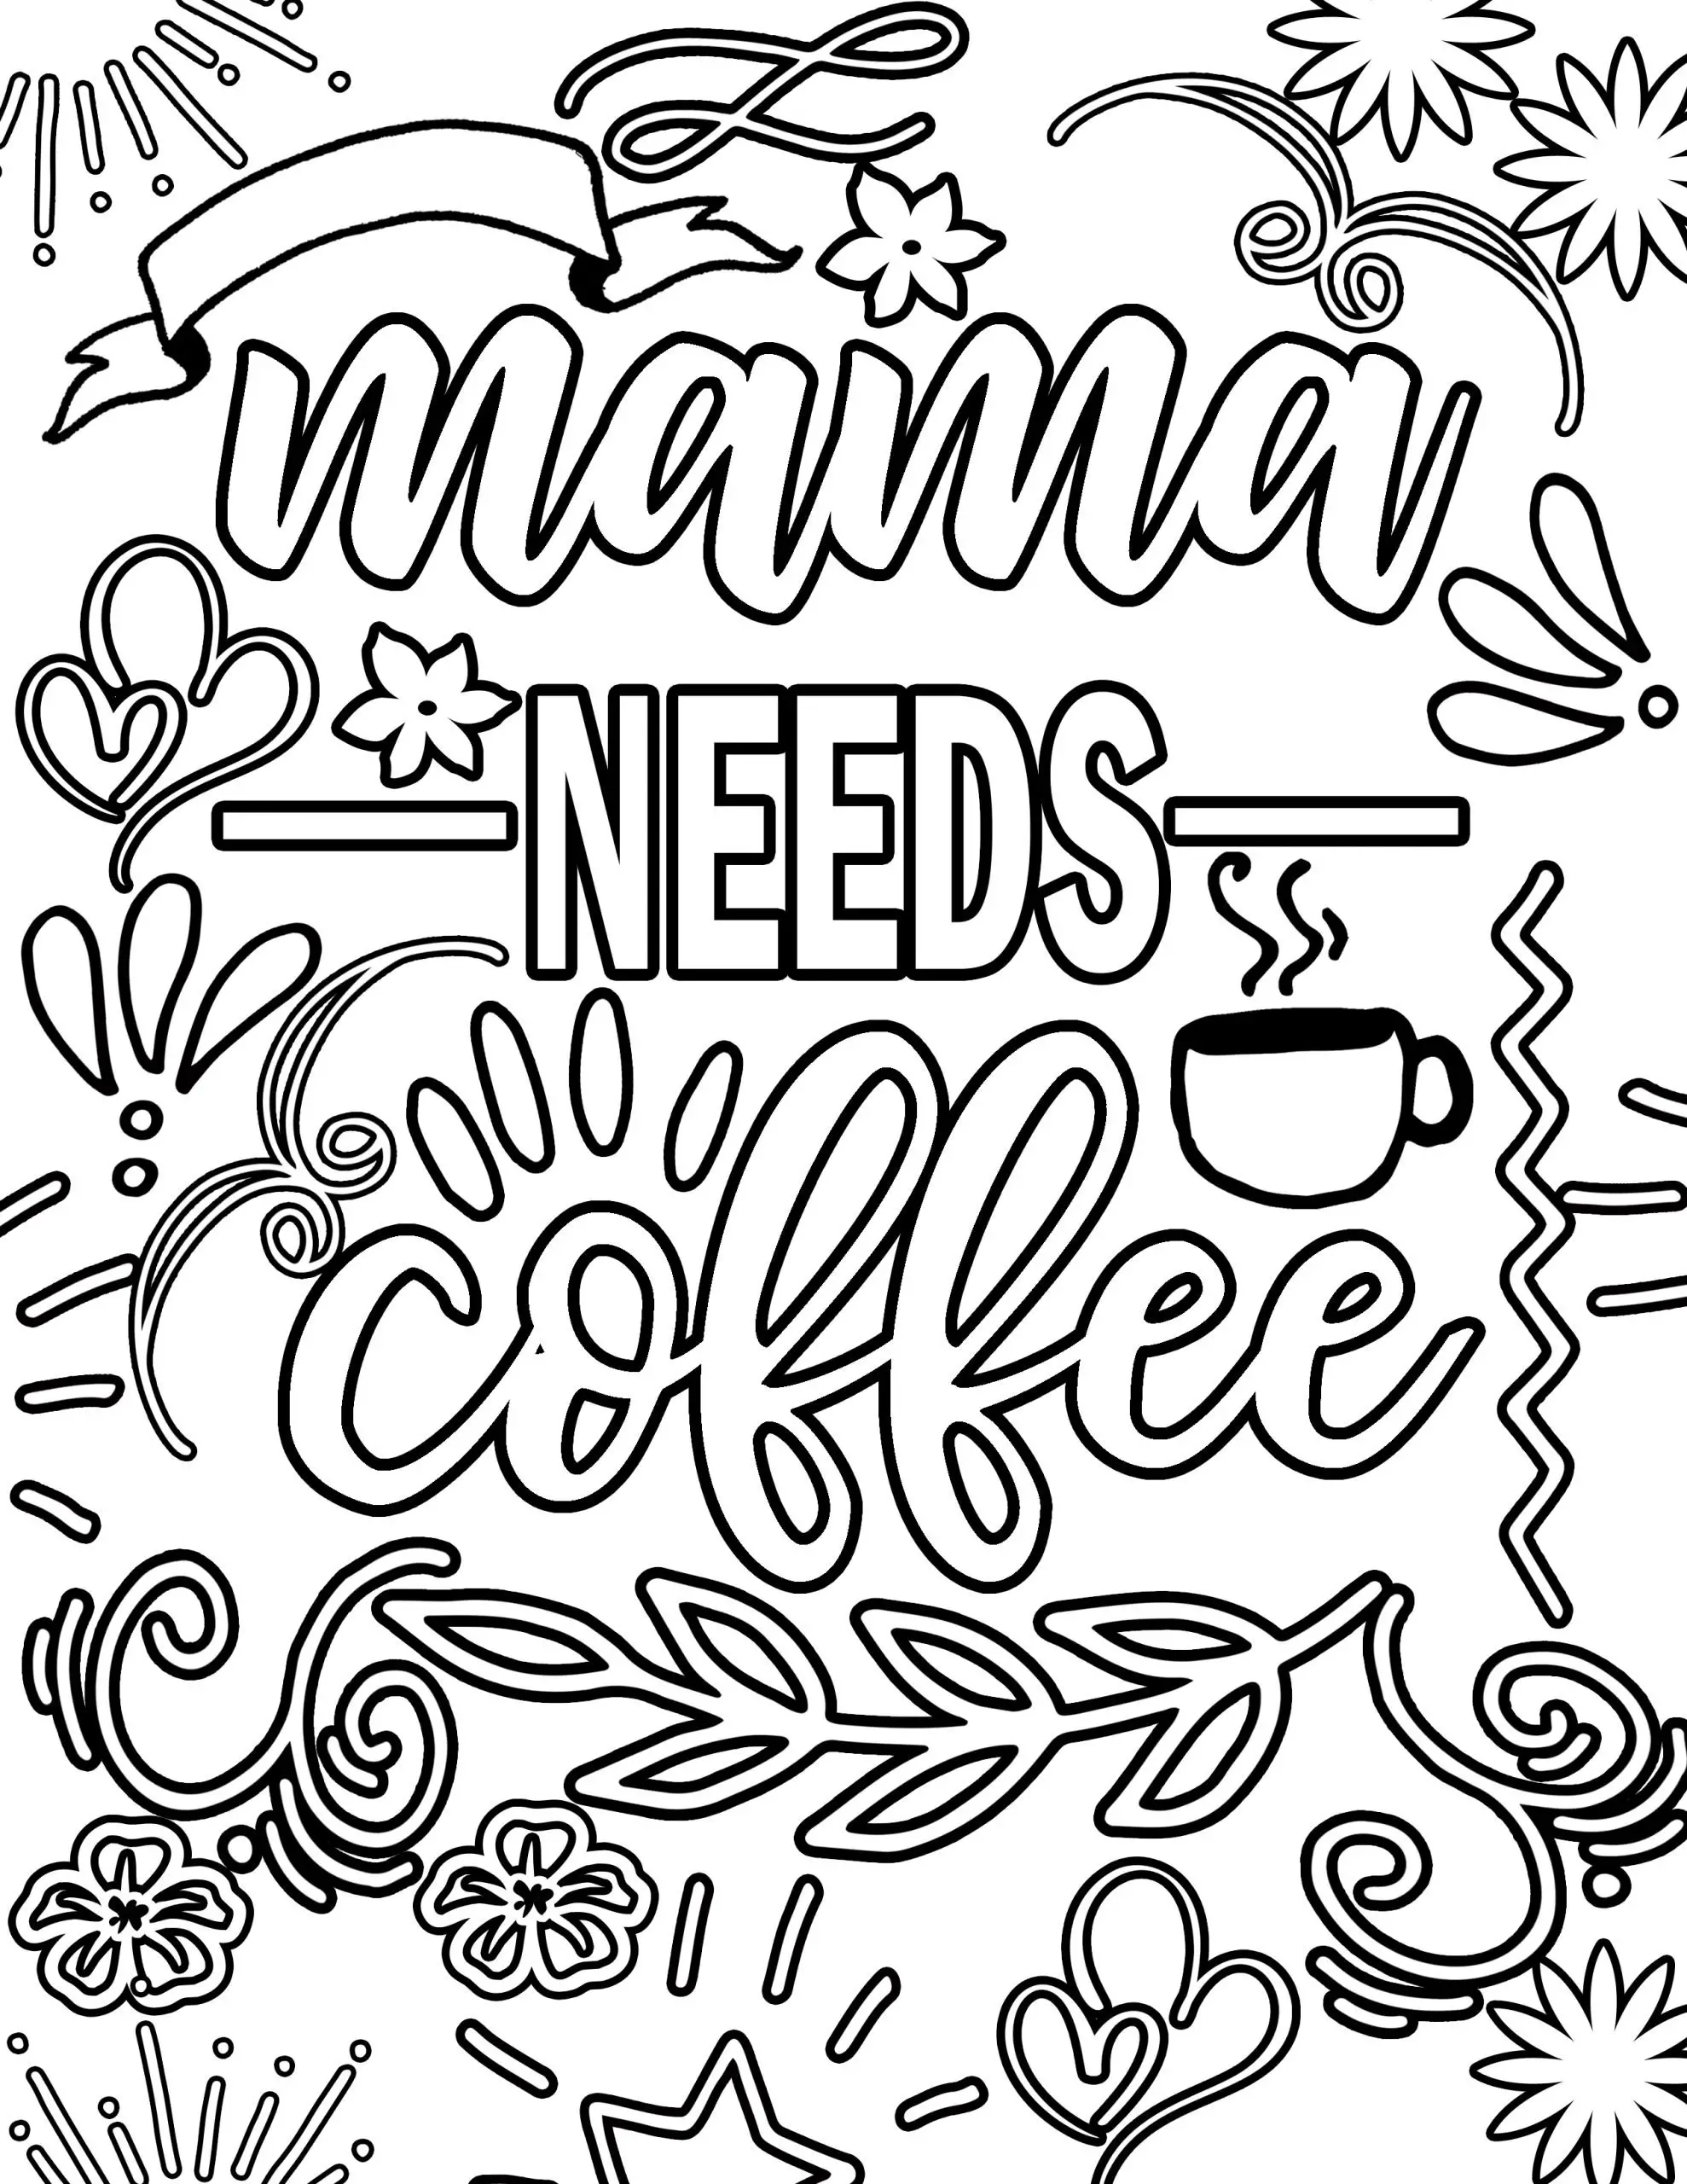 MOMMA NEEDS COFFEE FUNNY MOM MOTHER'S DAY flower with vines and frills Clipart Coloring Pages for Kids Adults Art Activities Line Art